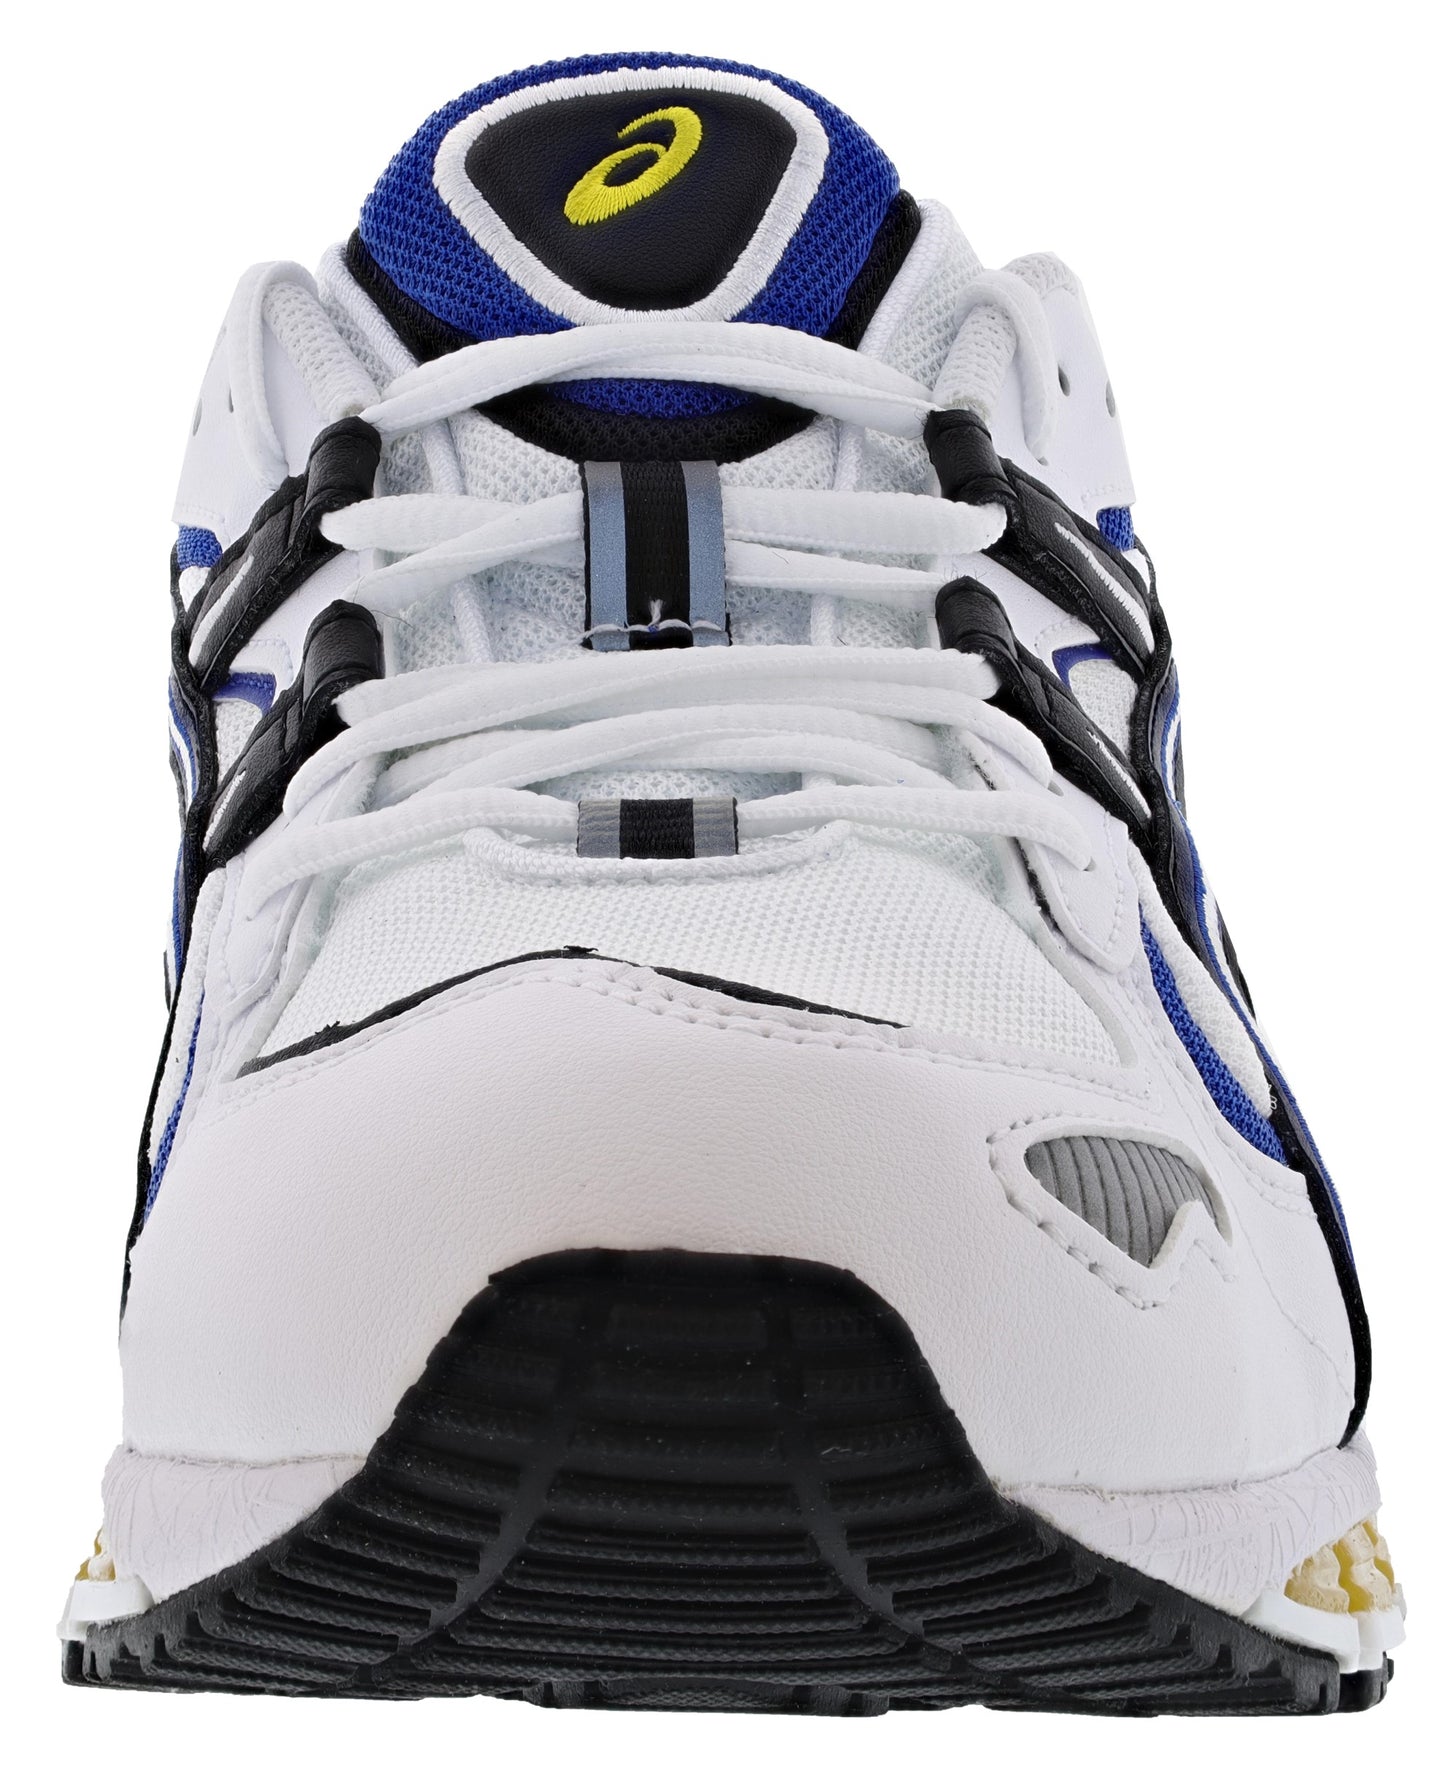 
                  
                    Front of White with Black and Blue accents ASICS Men's Cushioned Running Shoes Gel Kayano 5 360
                  
                